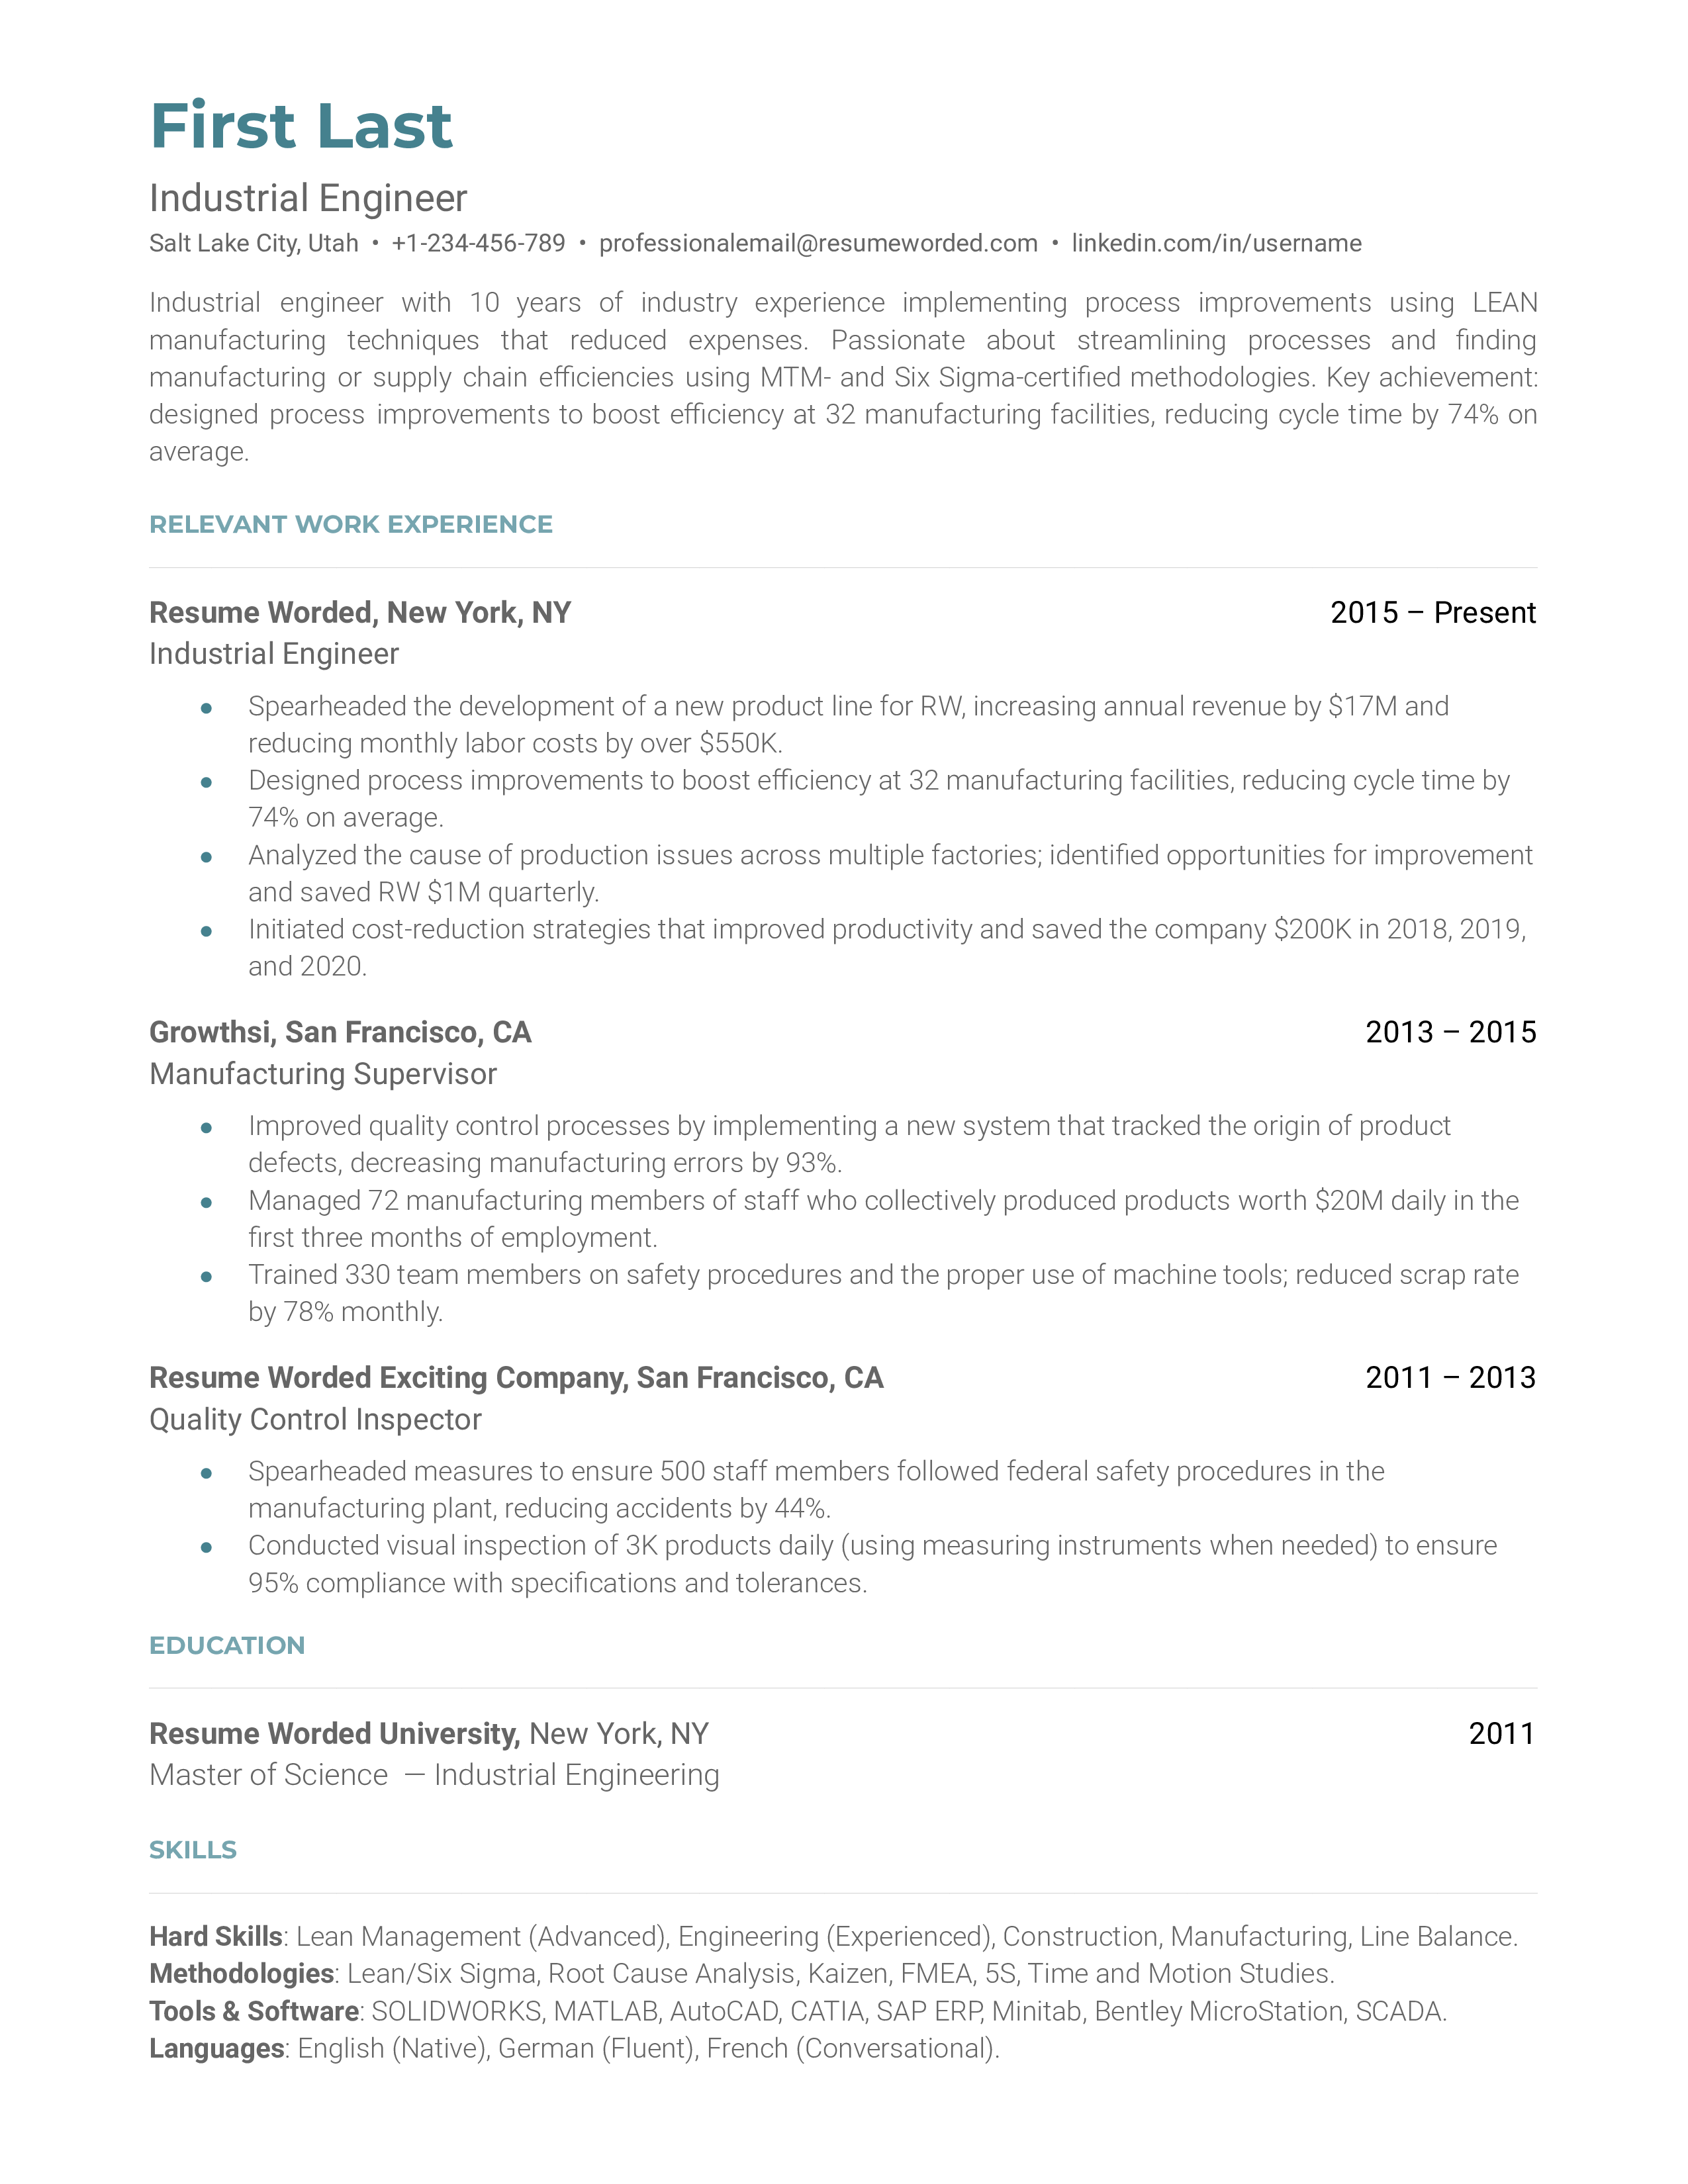 An Industrial Engineer CV reflecting technical competence and problem-solving skills.